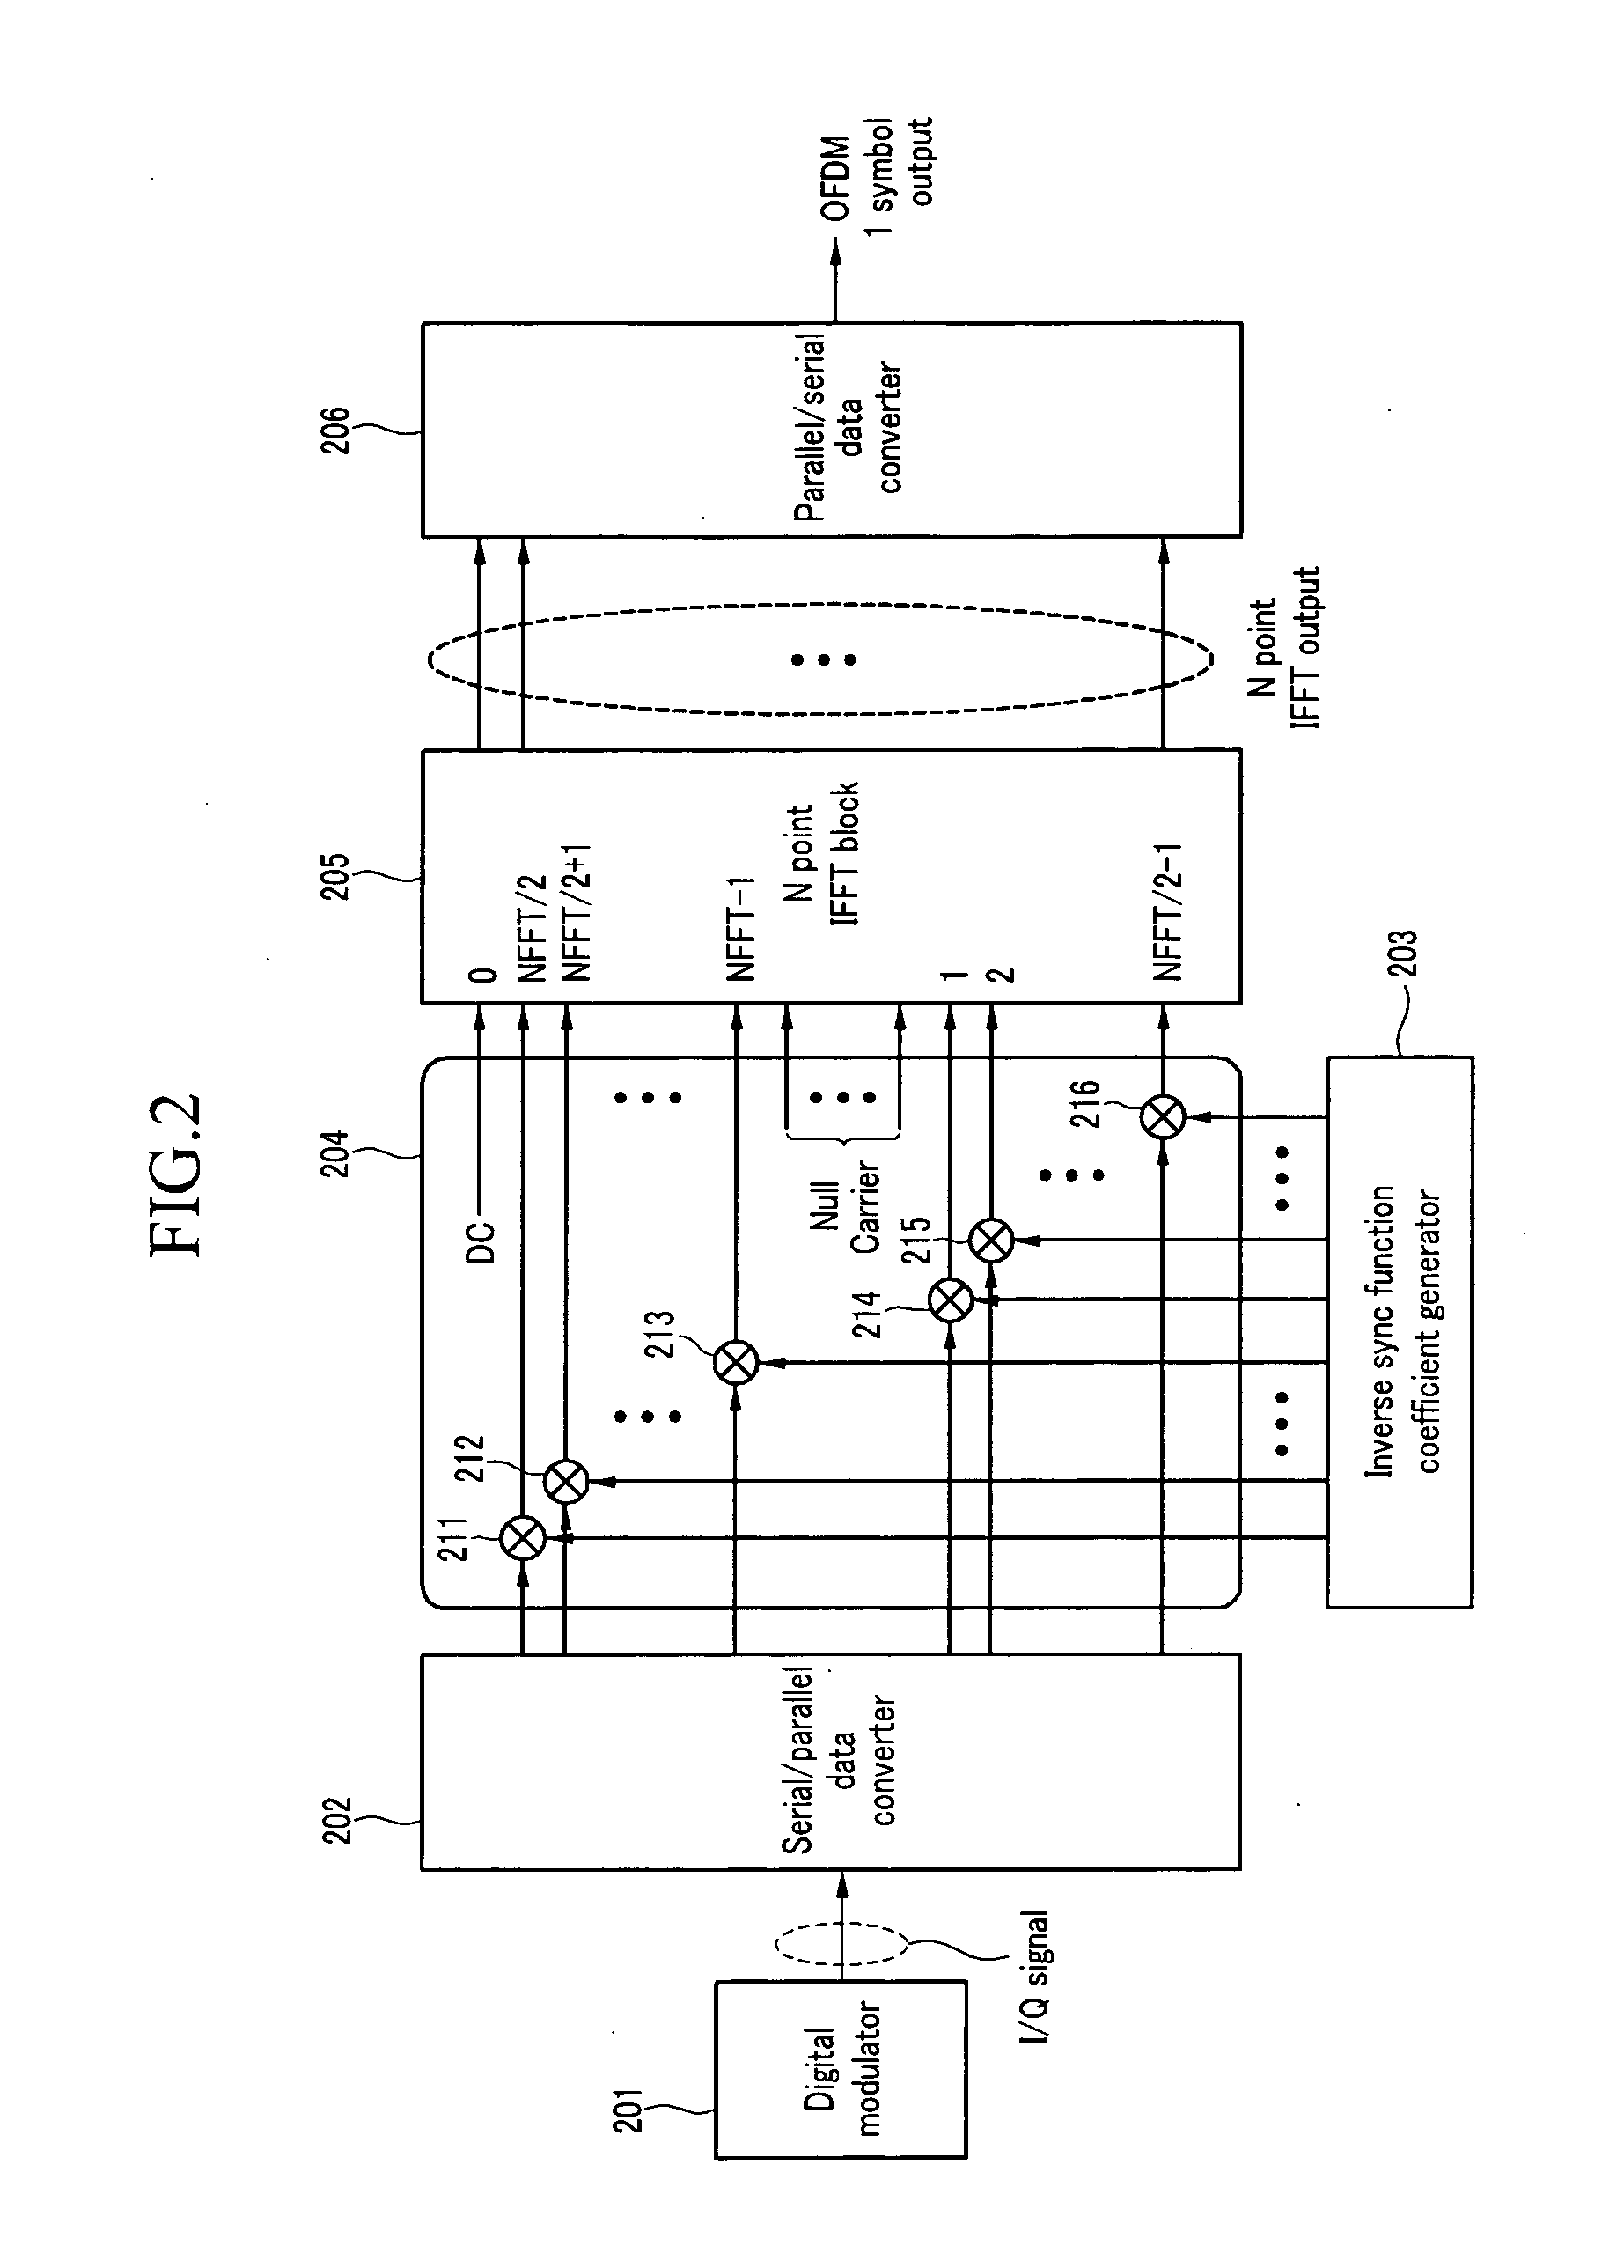 Device for compensating radio frequency distortion in orthogonal frequency division multiplexing transmission system and method thereof